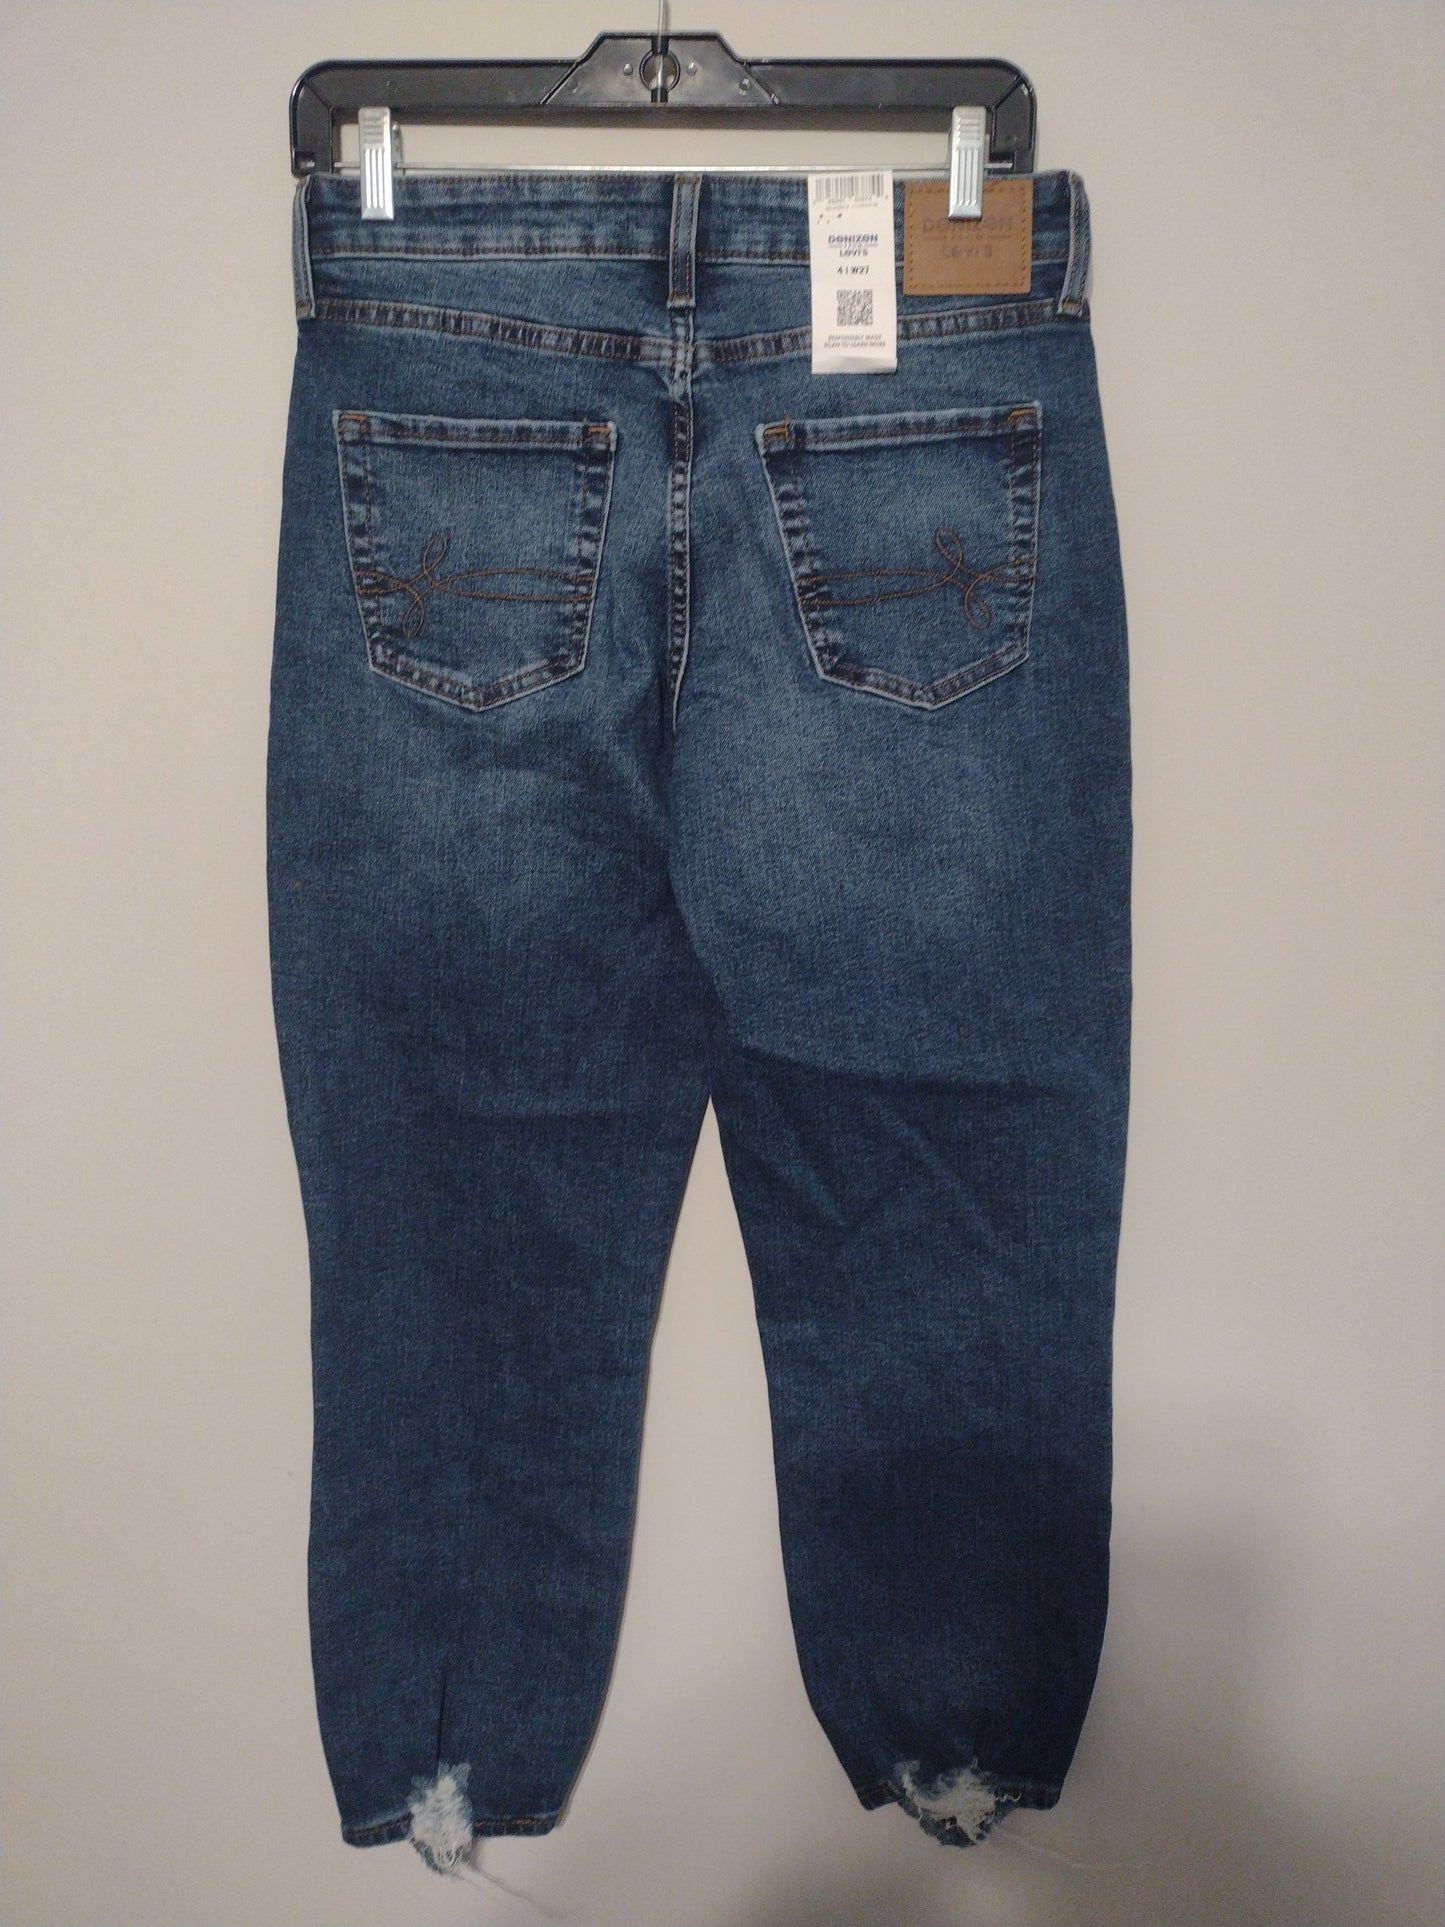 Jeans Relaxed/boyfriend By Levis  Size: 4